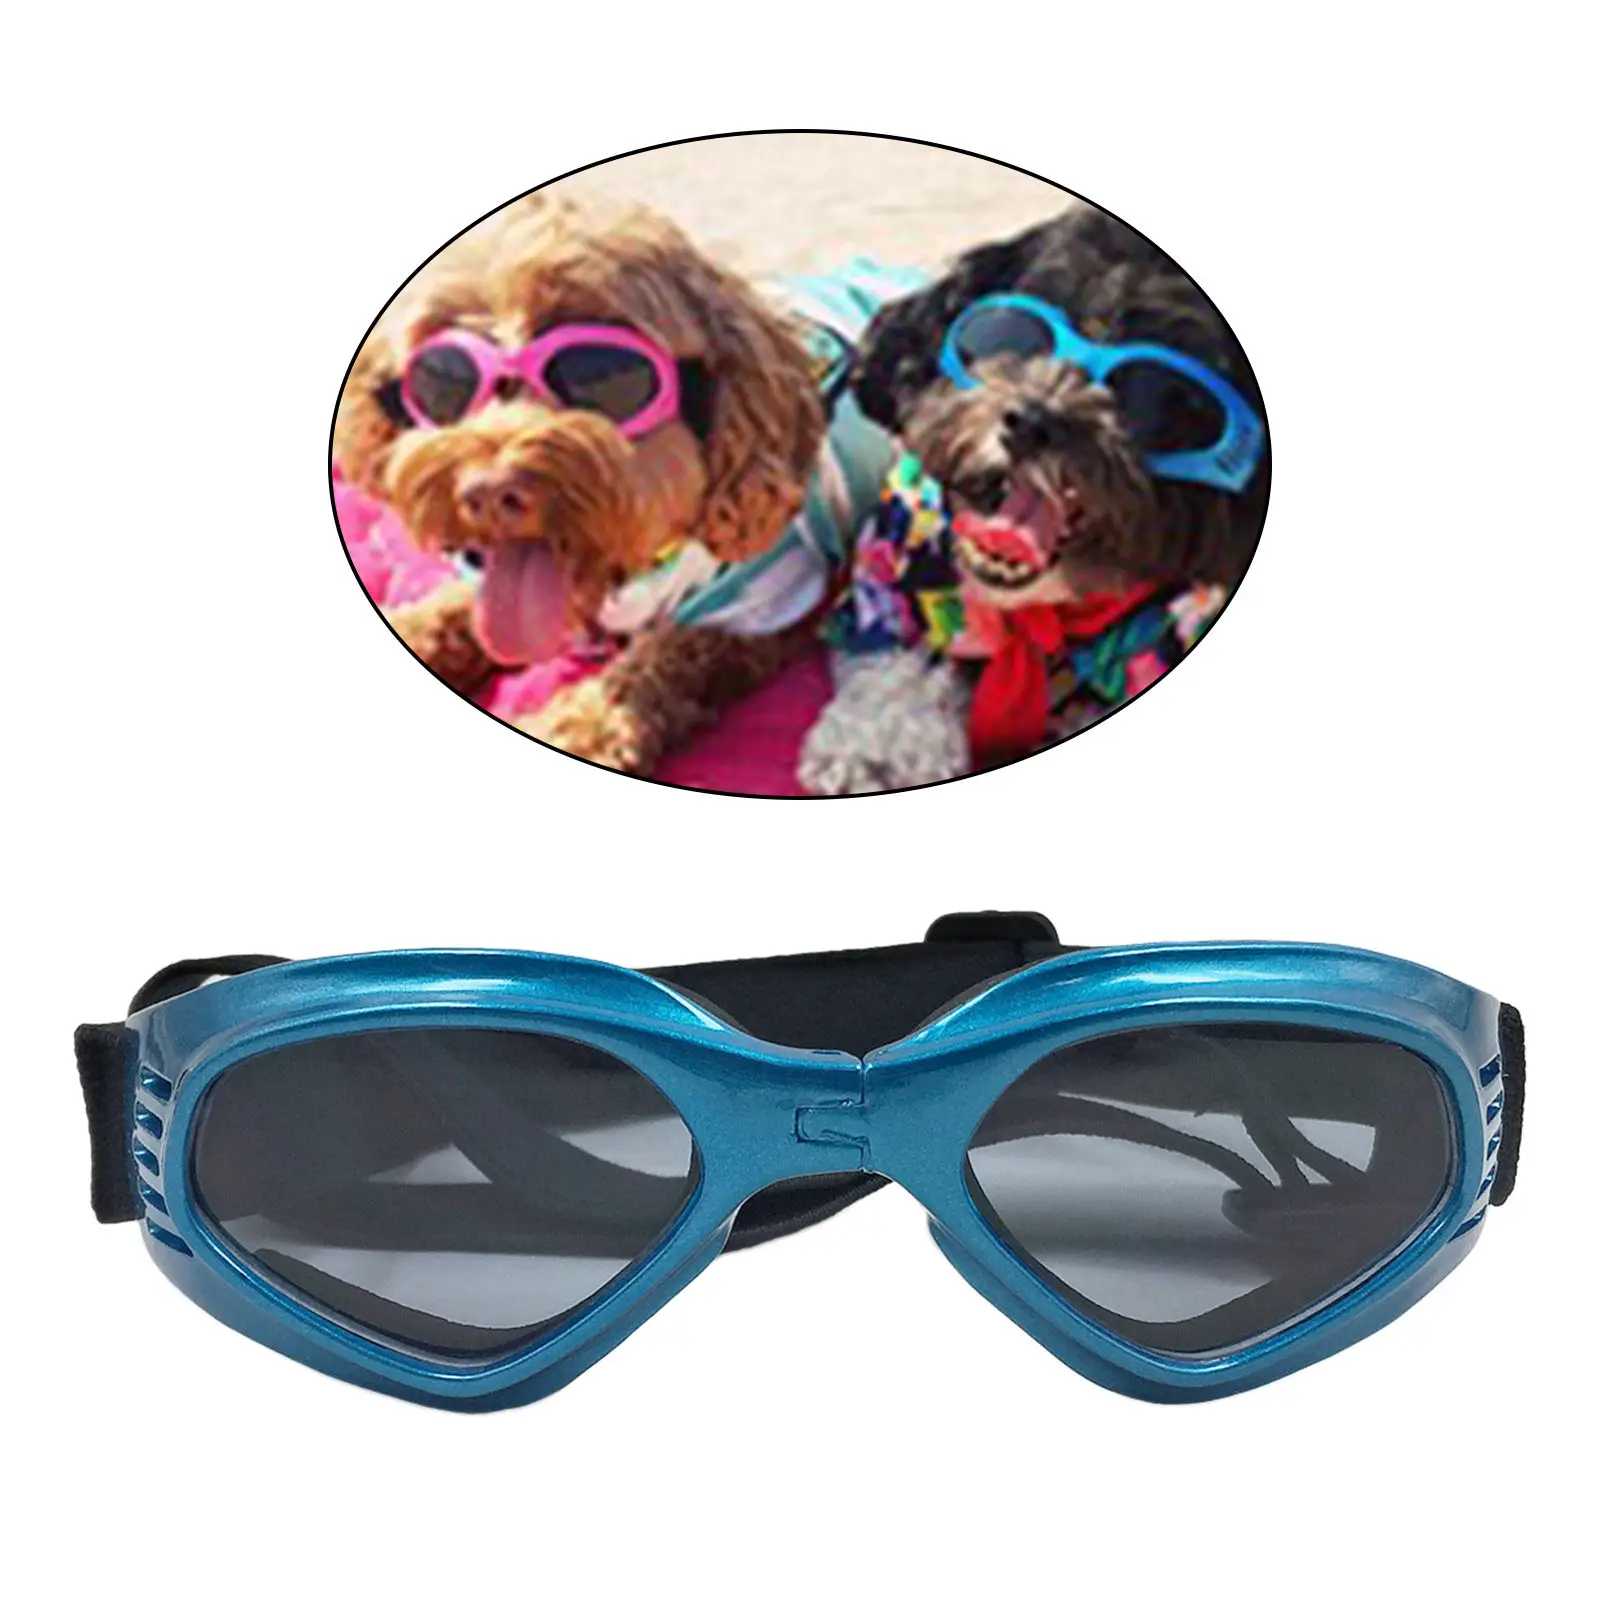 Dog Goggles Protection Eye Foldable Dust Protection Protection Cool Goggles Anti-Breaking Eye Wear Adjustable for Travel Skiing